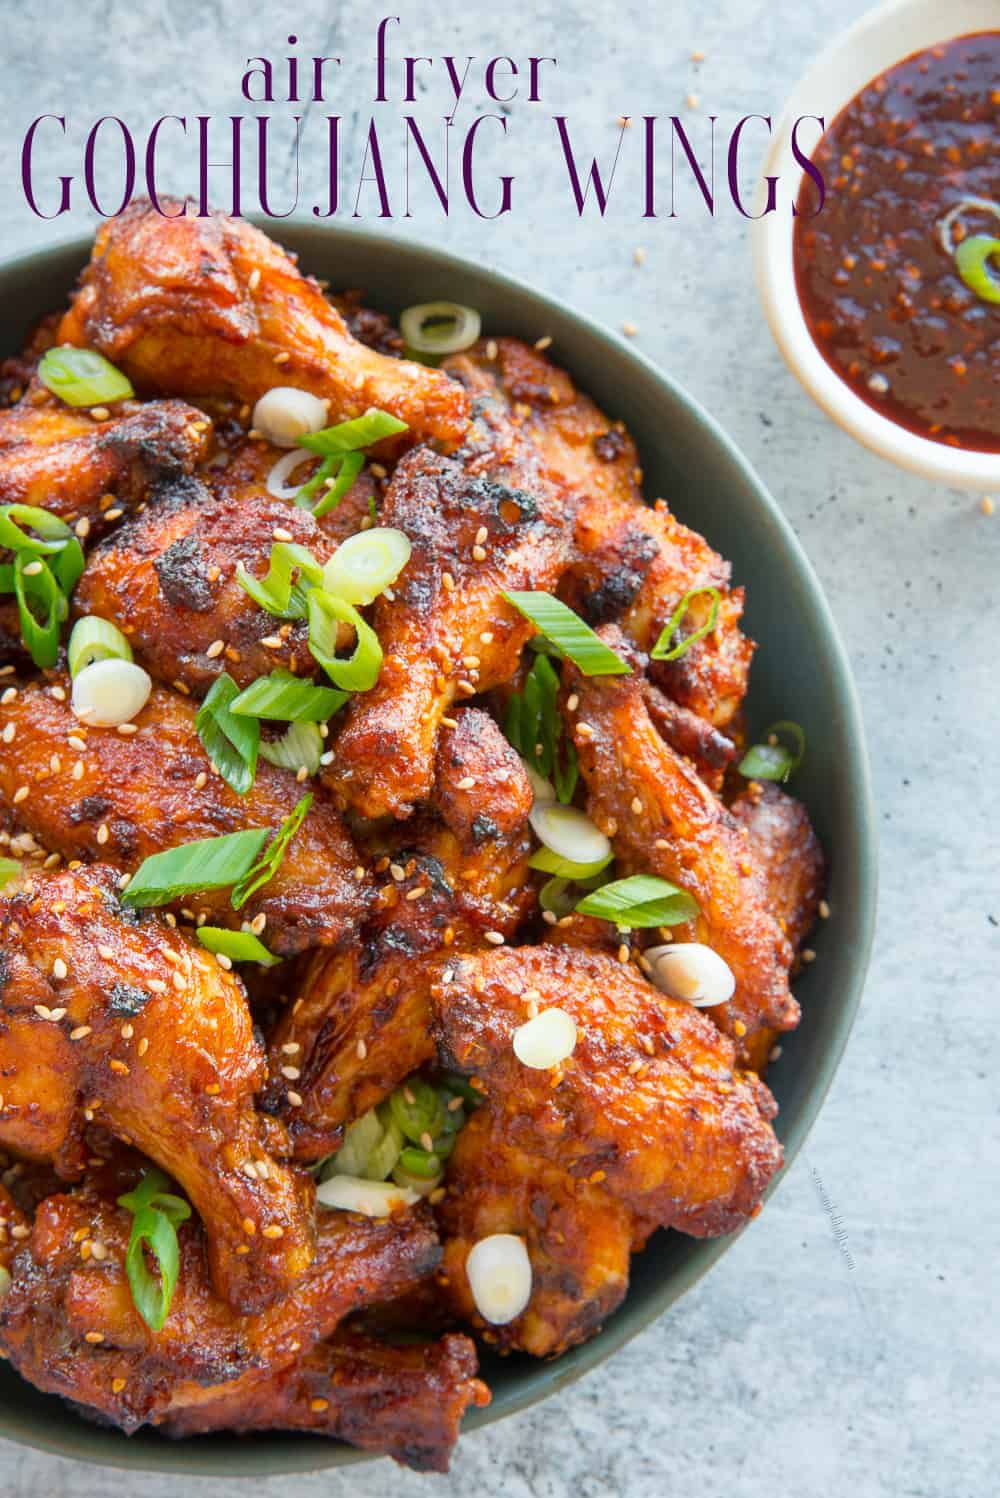 Gochujang Chicken Wings made in the Air Fryer are simple and tasty. Make your next batch with this Korean red pepper condiment and level up your wing game. #chickenwings #airfryerrecipes #chickenwingrecipe #wings #chickenrecipe #gamedayrecipe #gochujang #Koreanchickenwings #Koreanrecipes via @ediblesense